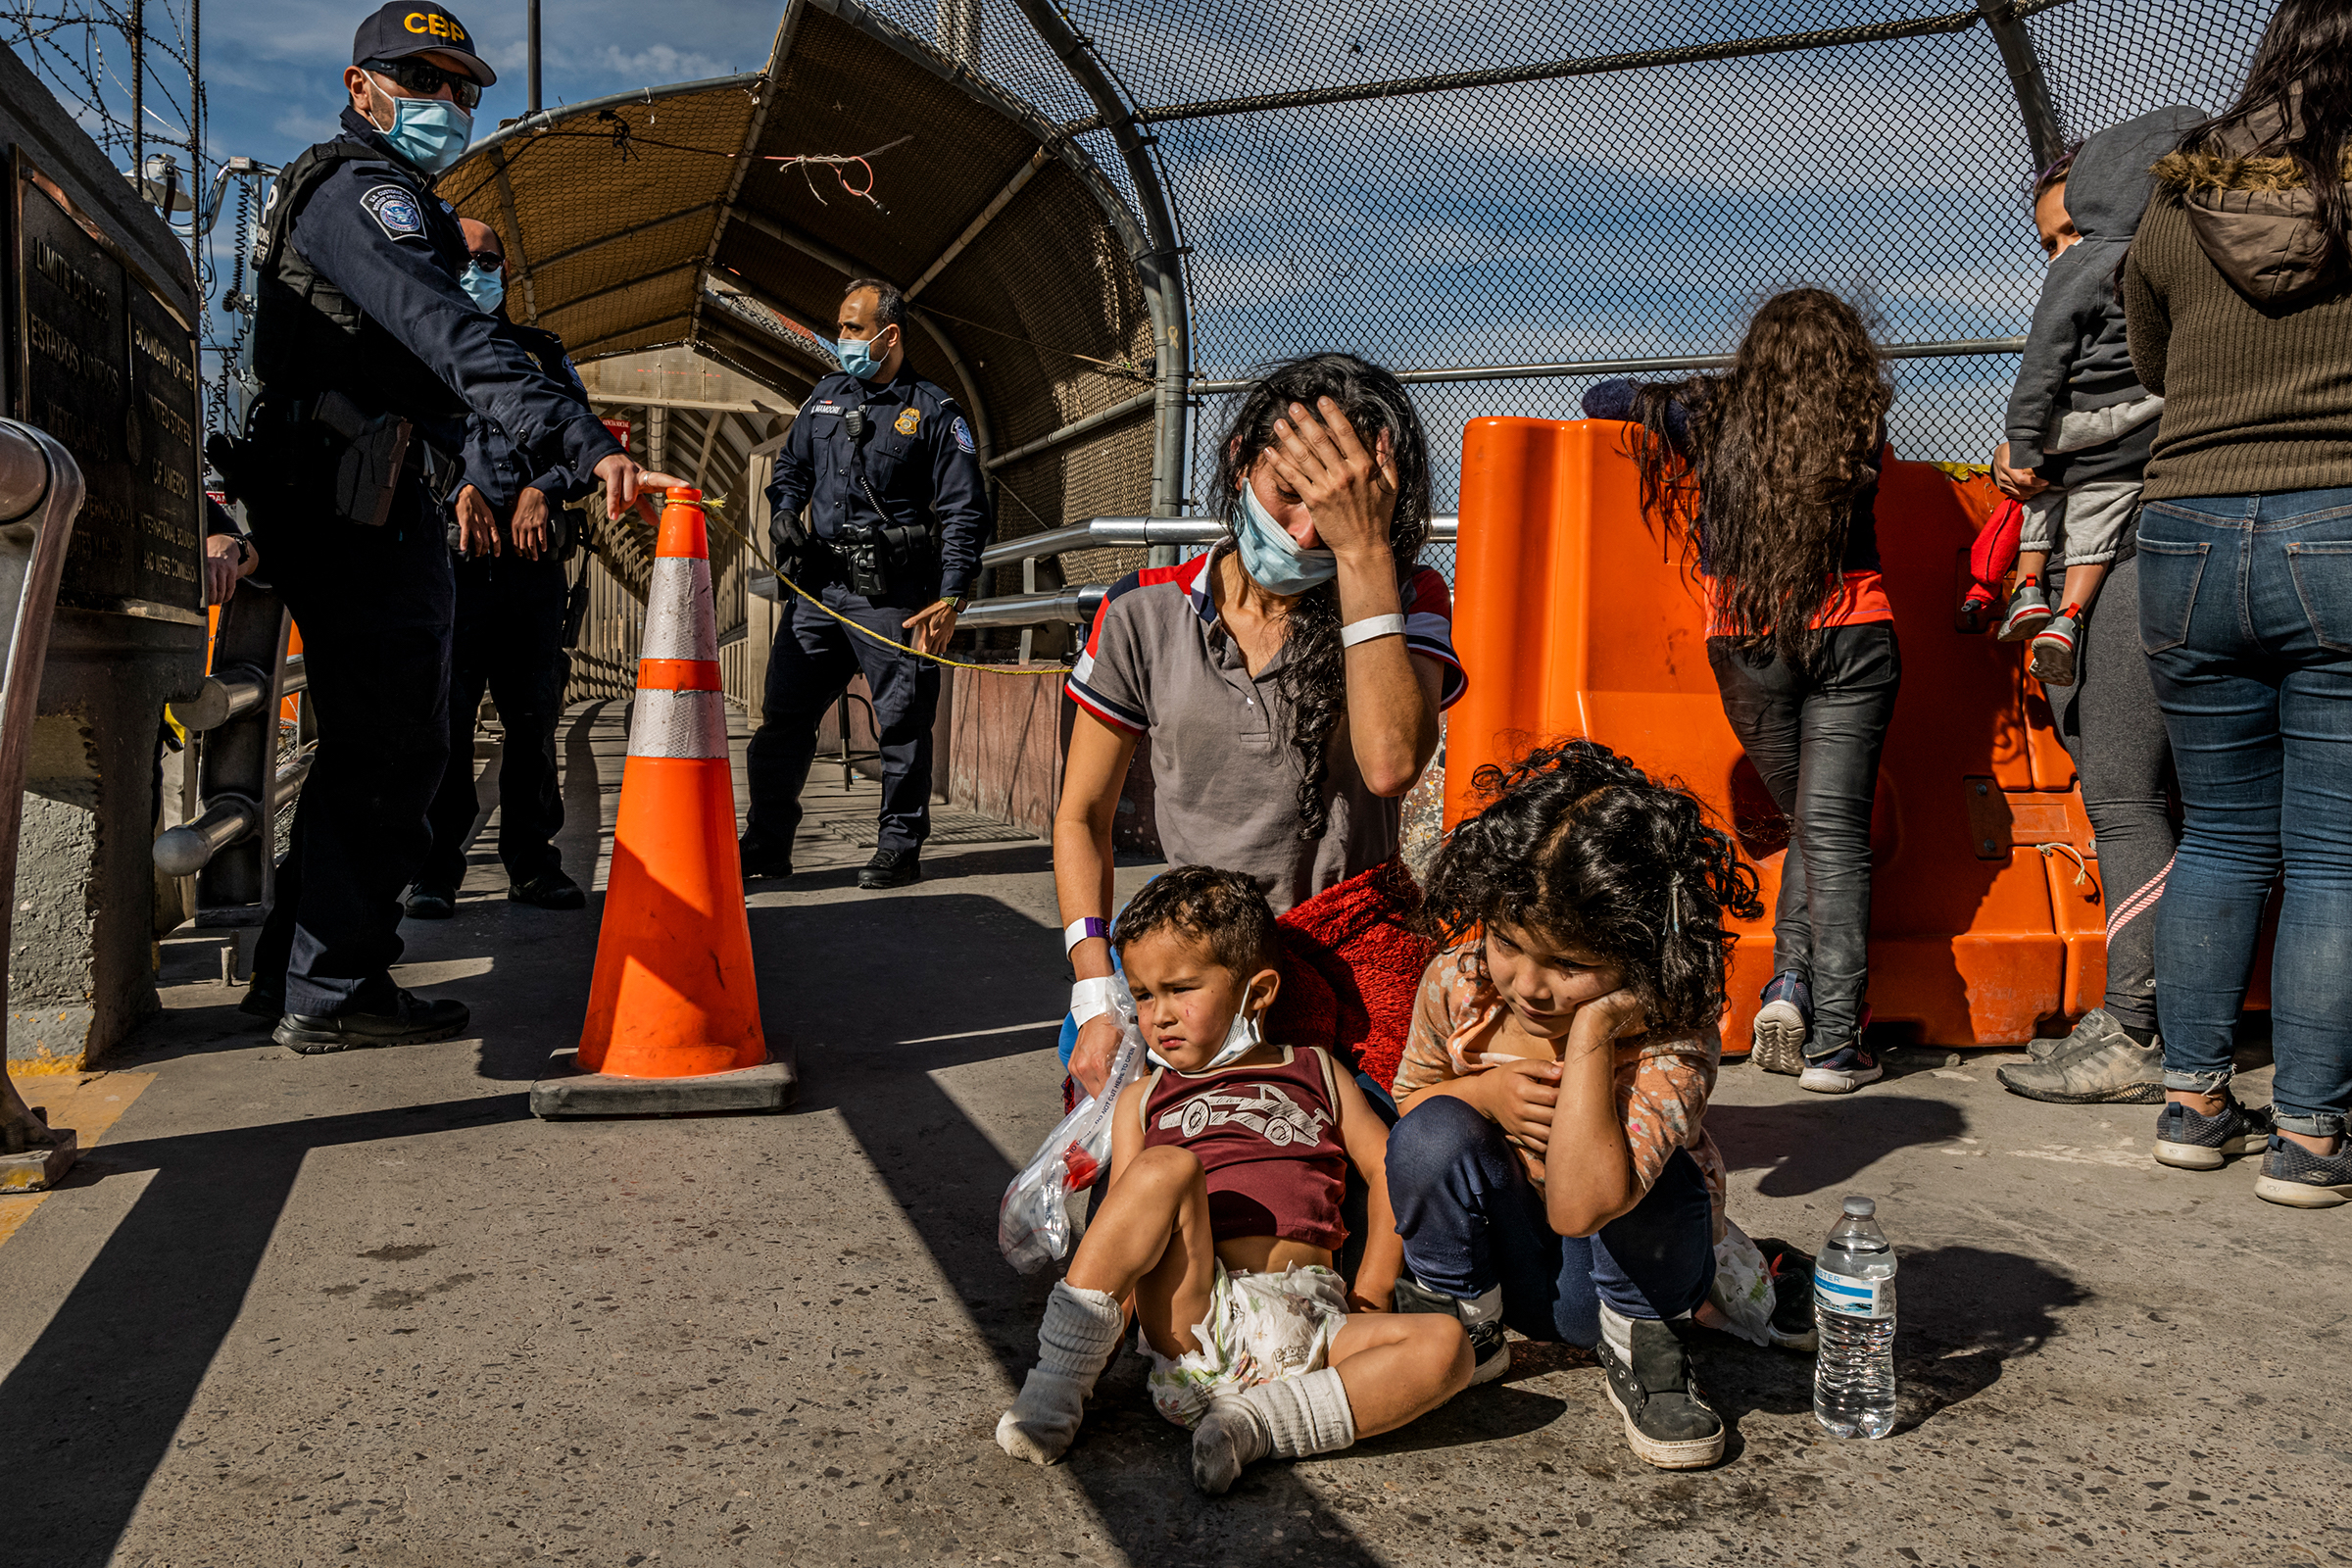 Vilma Iris Peraza, 28, from Honduras cries as she kneels next to her two children, Adriana Melissa Urrea Peraza, 5, Erick Jacob Urrea Peraza, 2, after finding out they were back in Mexico after being escorted by U.S. Customs and Border Protection agents to the middle of the Paso Del Norte International bridge in Ciudad Juarez on March 18. On March 3, she fled Honduras after her husband, who has lived in Nashville for two years, paid $12,000 to a smuggler for the voyage to Reynosa, where they were caught and captured by U.S. border agents. "I just want to reconnect with my husband to give our children a better future," she said. "In my country, there is a lot of poverty, nothing can be done." Most of the families had crossed illegally into the U.S. around Reynosa, and then were flown to El Paso to be deported.